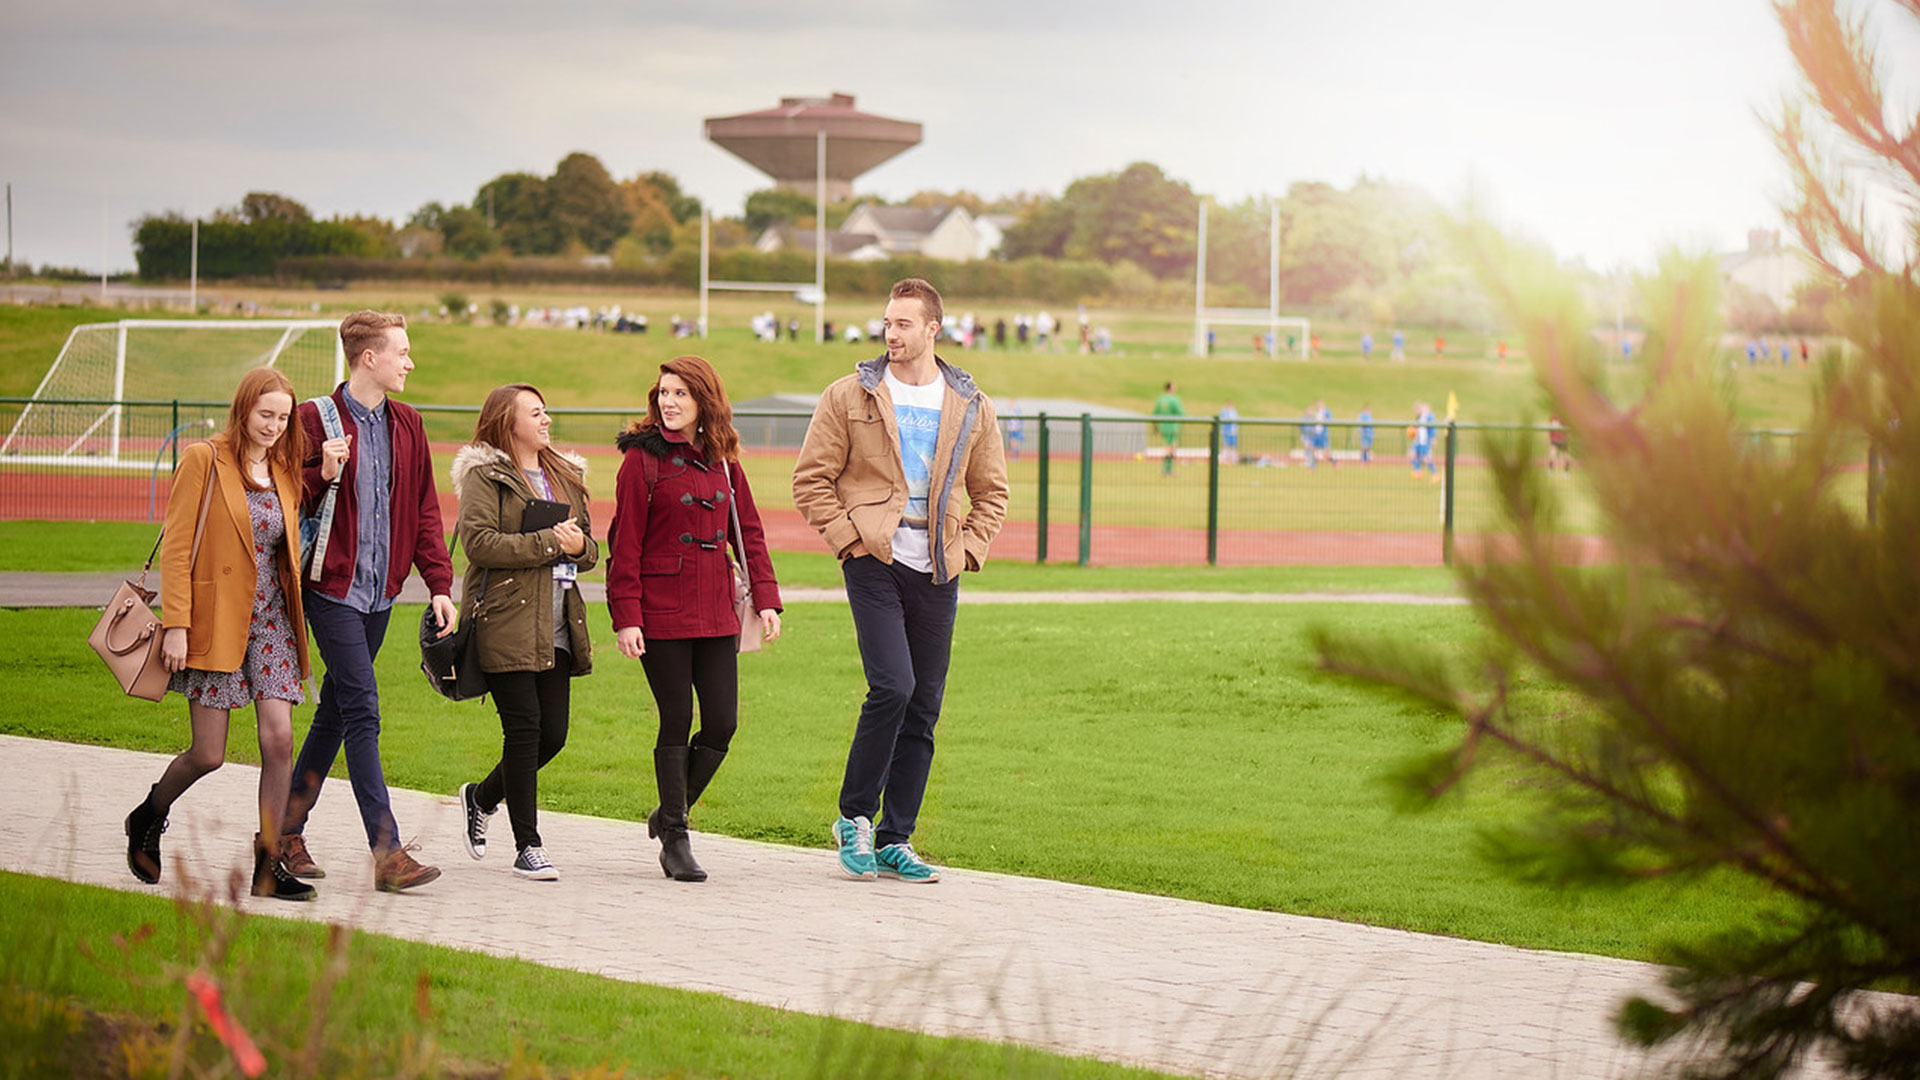 Five students walking on a path on campus. There are students in the background playing football on the sports pitch.